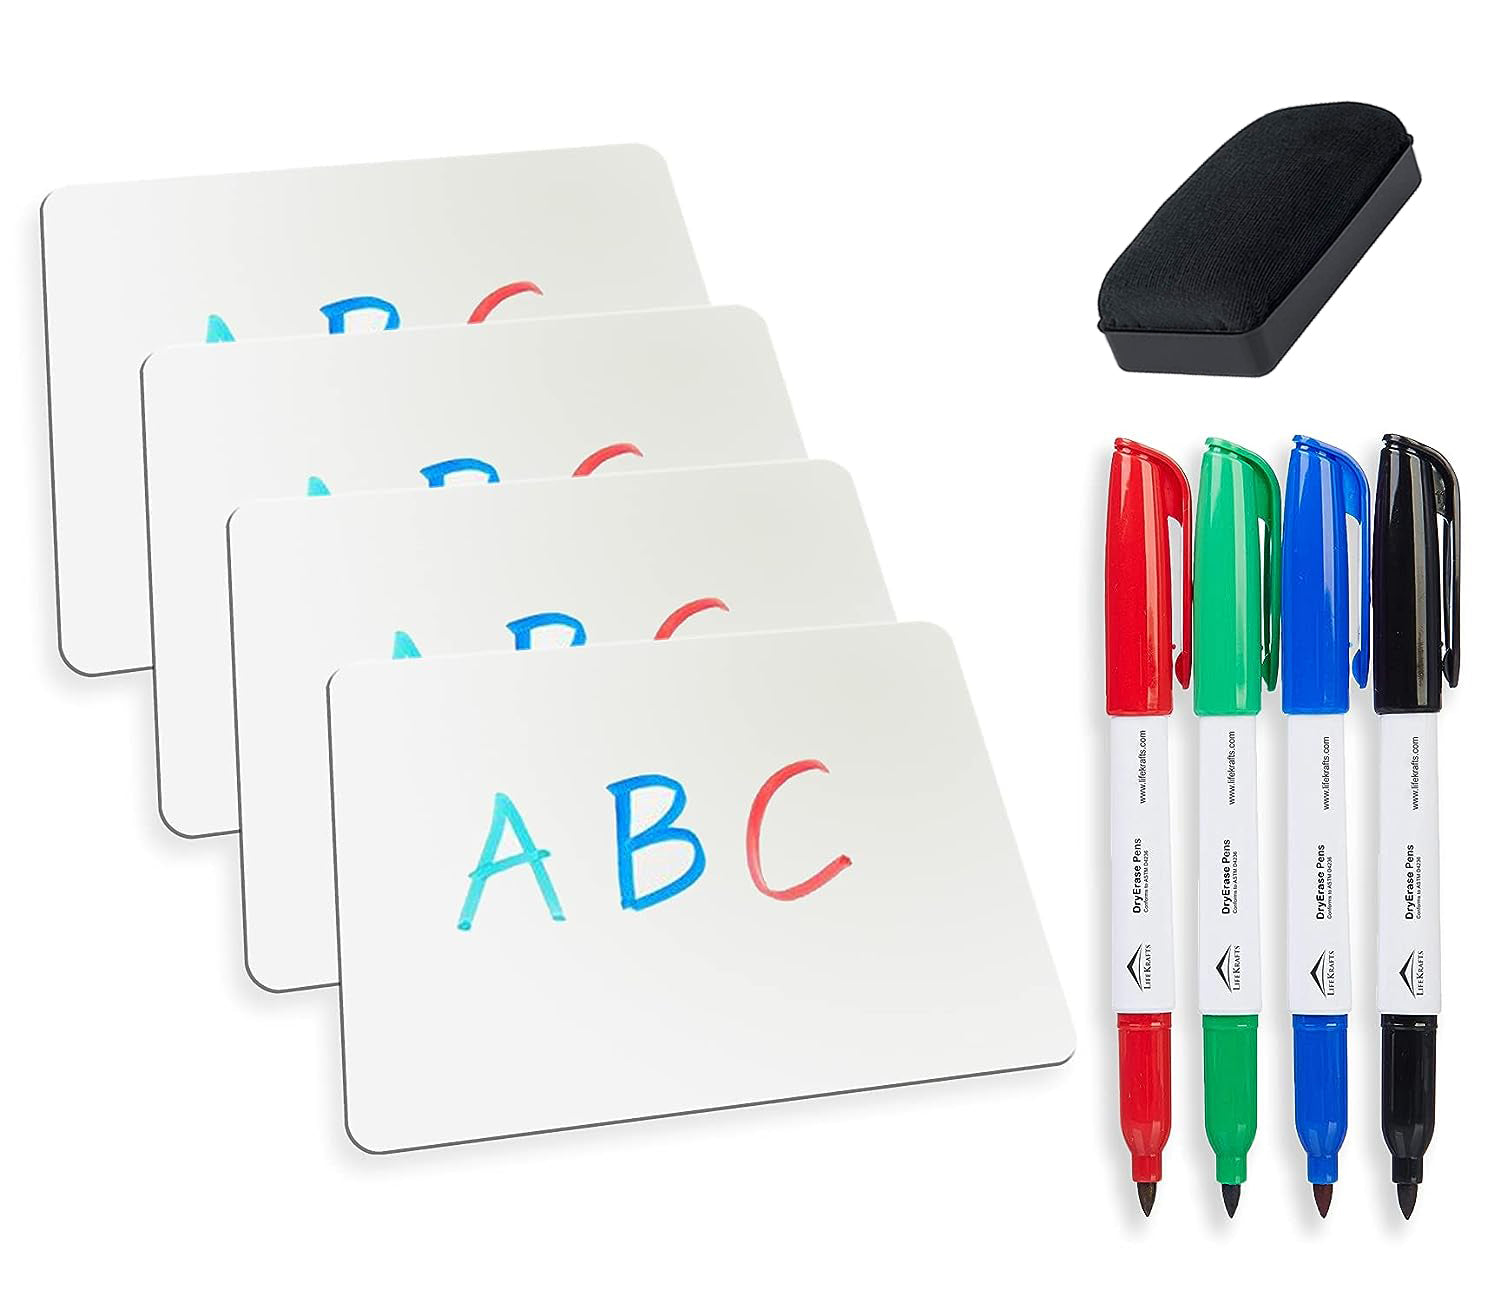 Dry Erase Single sided board, Whiteboard Lapboards - 9 x 12 inches